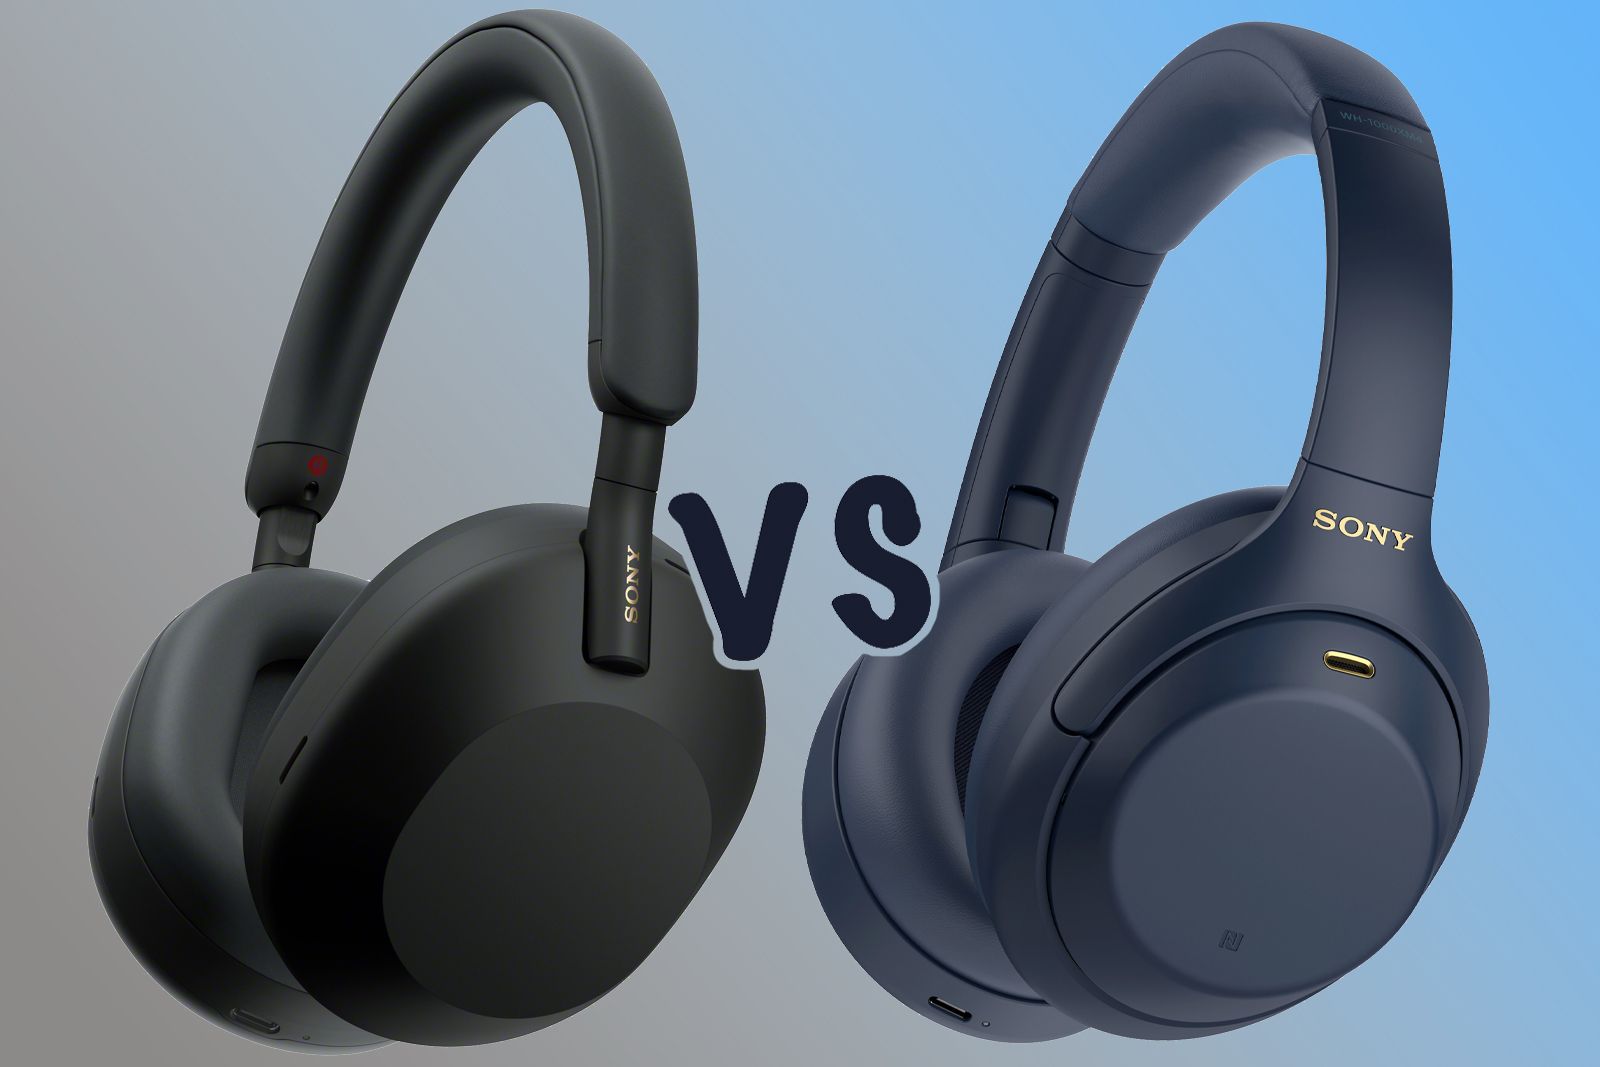 Sony WH-1000XM5 vs WH-1000XM4: What's new and what's different?